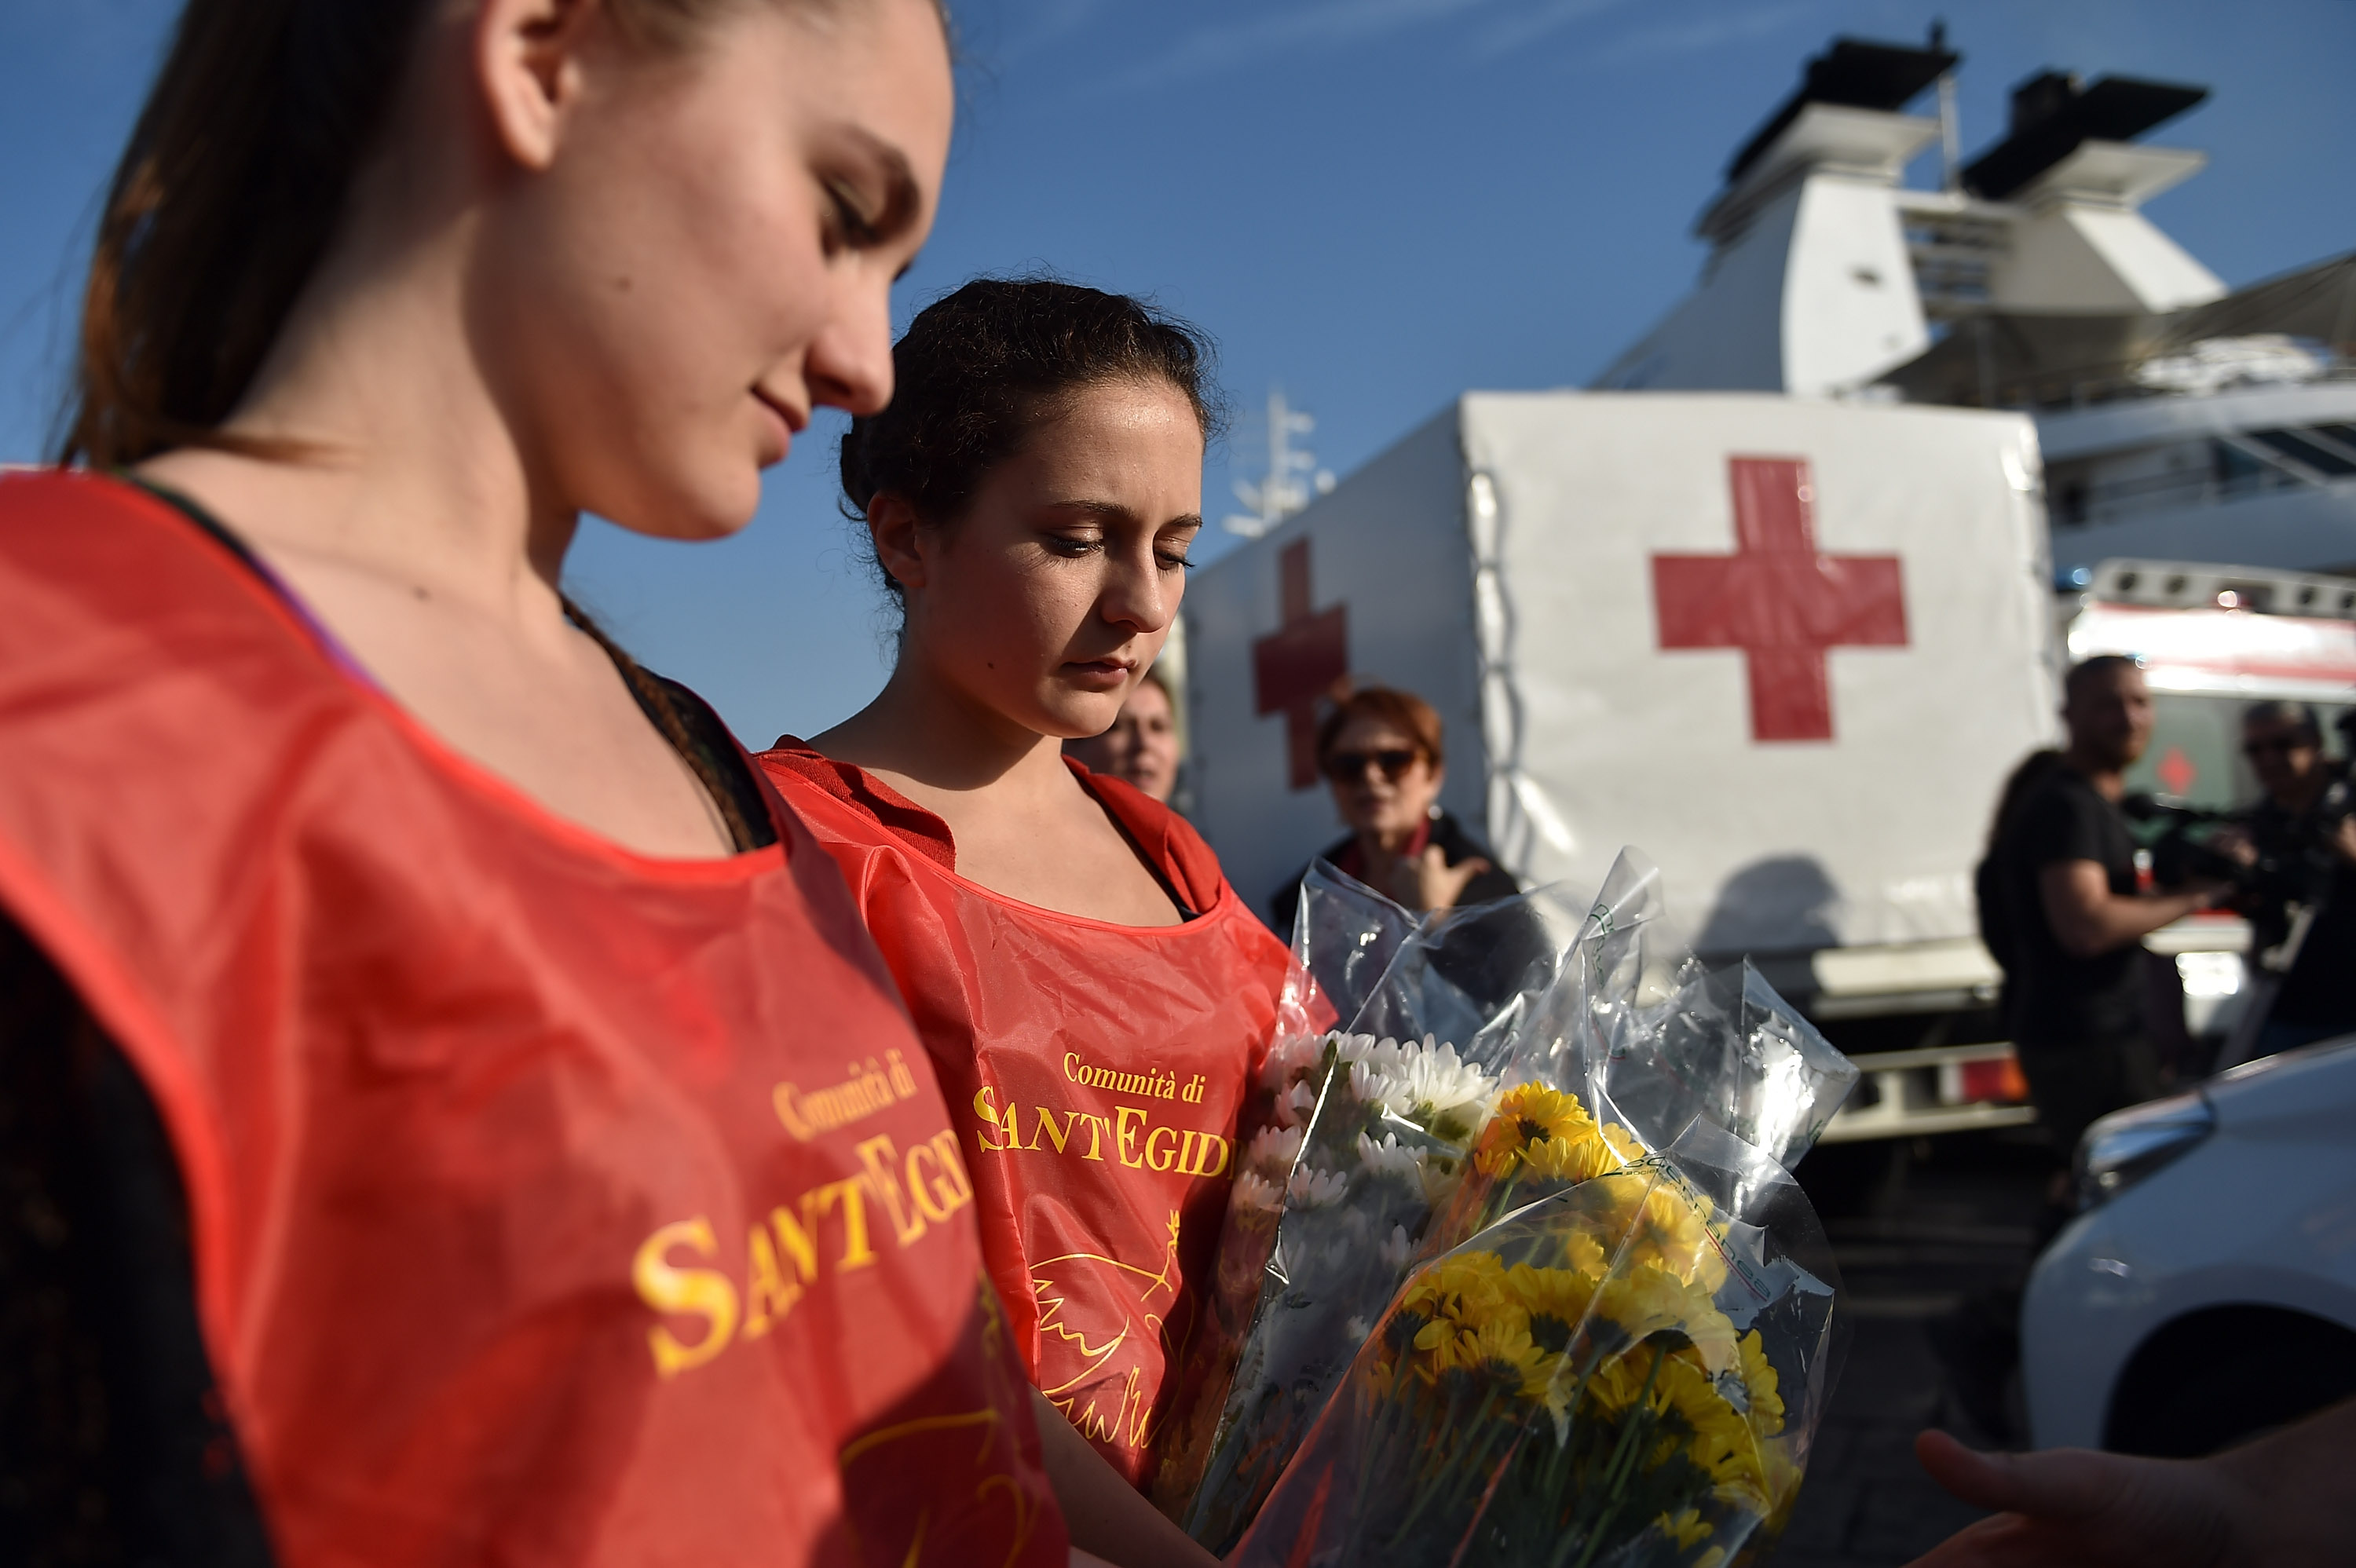 Sant'Egidio Community volunteers hold flowers while waiting arrival of Italian Navy Ship Grecale arriving at the Port of Catania, carrying 206 migrants and 17 bodies of the victims of a shipwrecked boat between Sicily and the north of Africa on May 13, 2014 (Tullio M. Puglia—Getty Images)